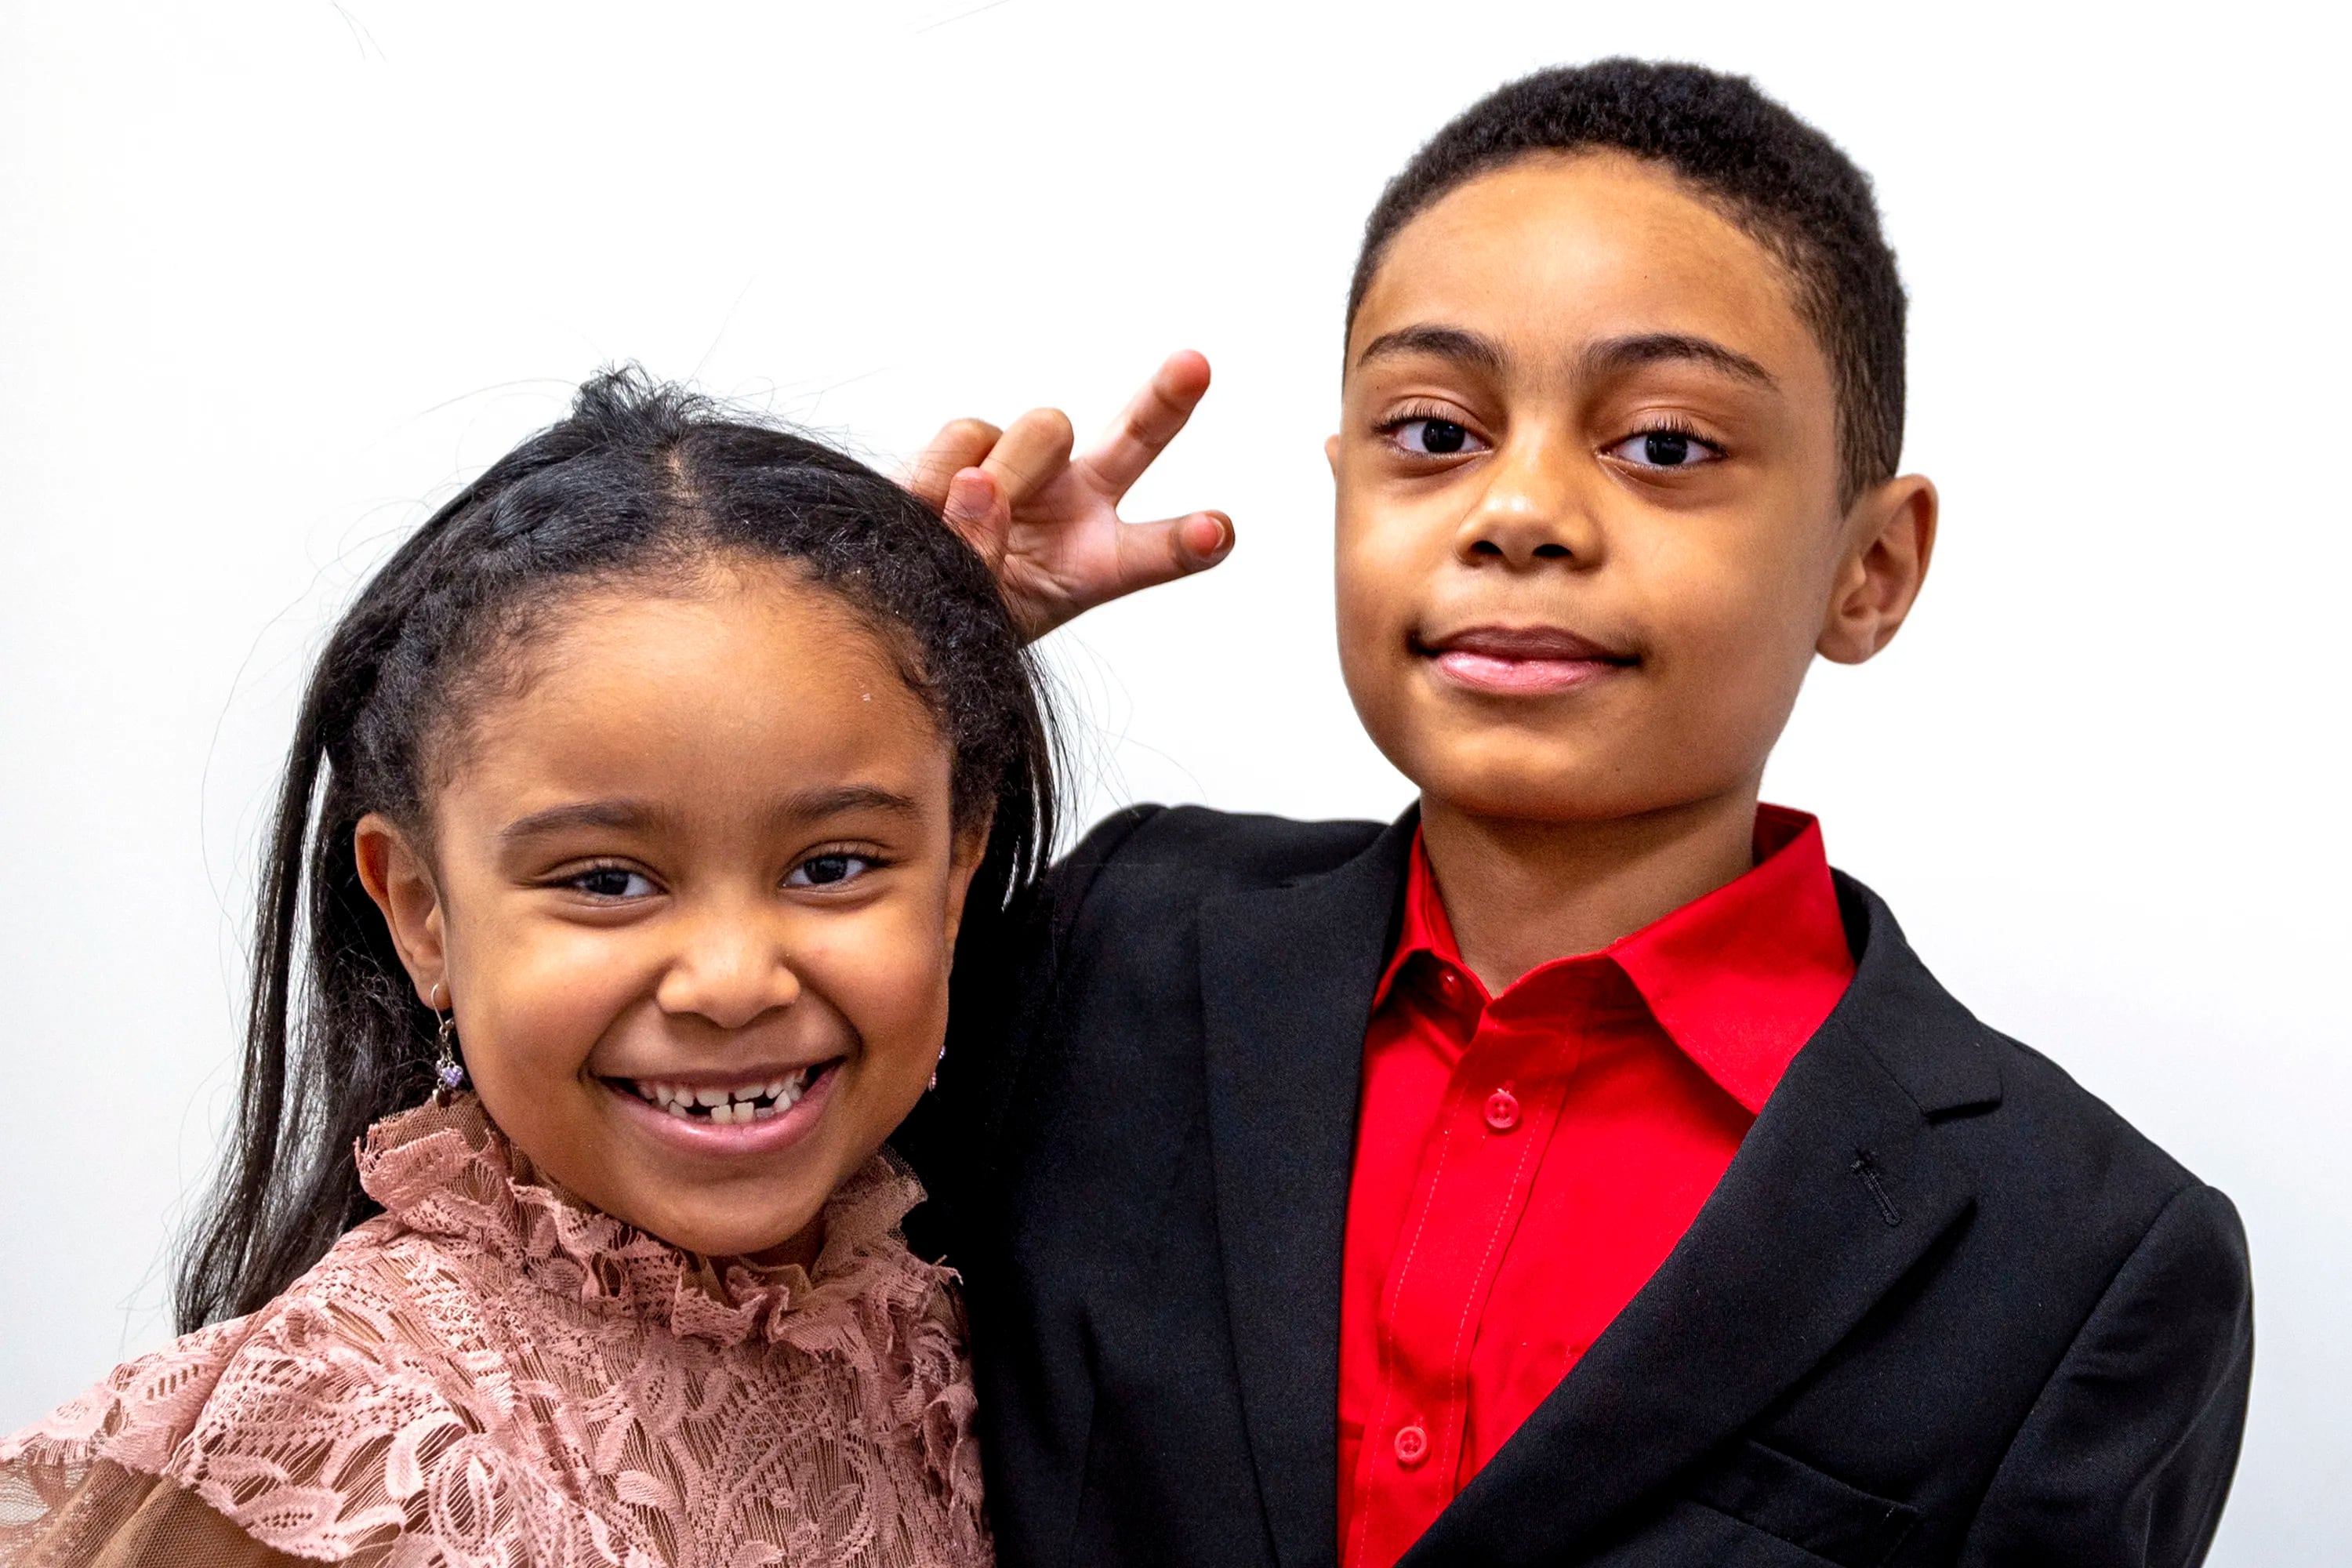 David Balogun gives his sister Eliana, 6, bunny ears while they pose for a photo at their father’s office. David, who just graduated from high school, one of the youngest people ever to do so, is into black holes and space theory and is contemplating where he'll attend college.